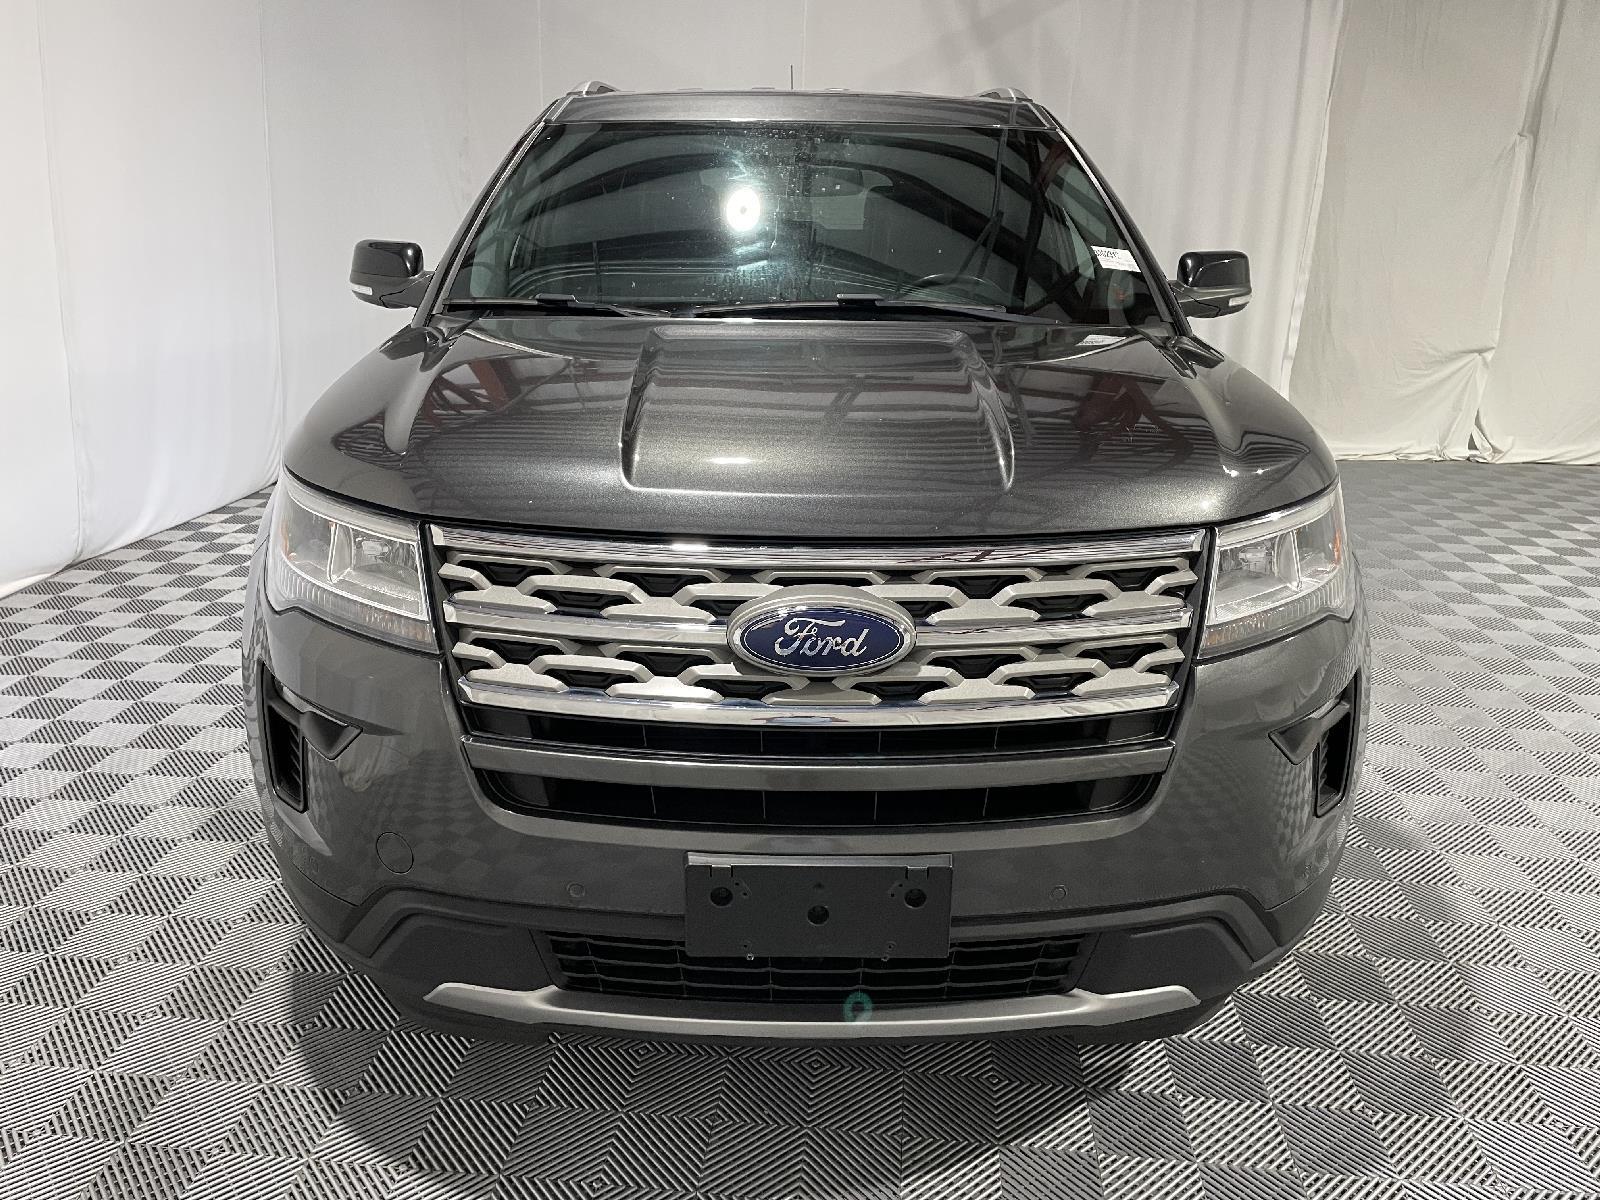 Used 2018 Ford Explorer XLT SUV for sale in St Joseph MO